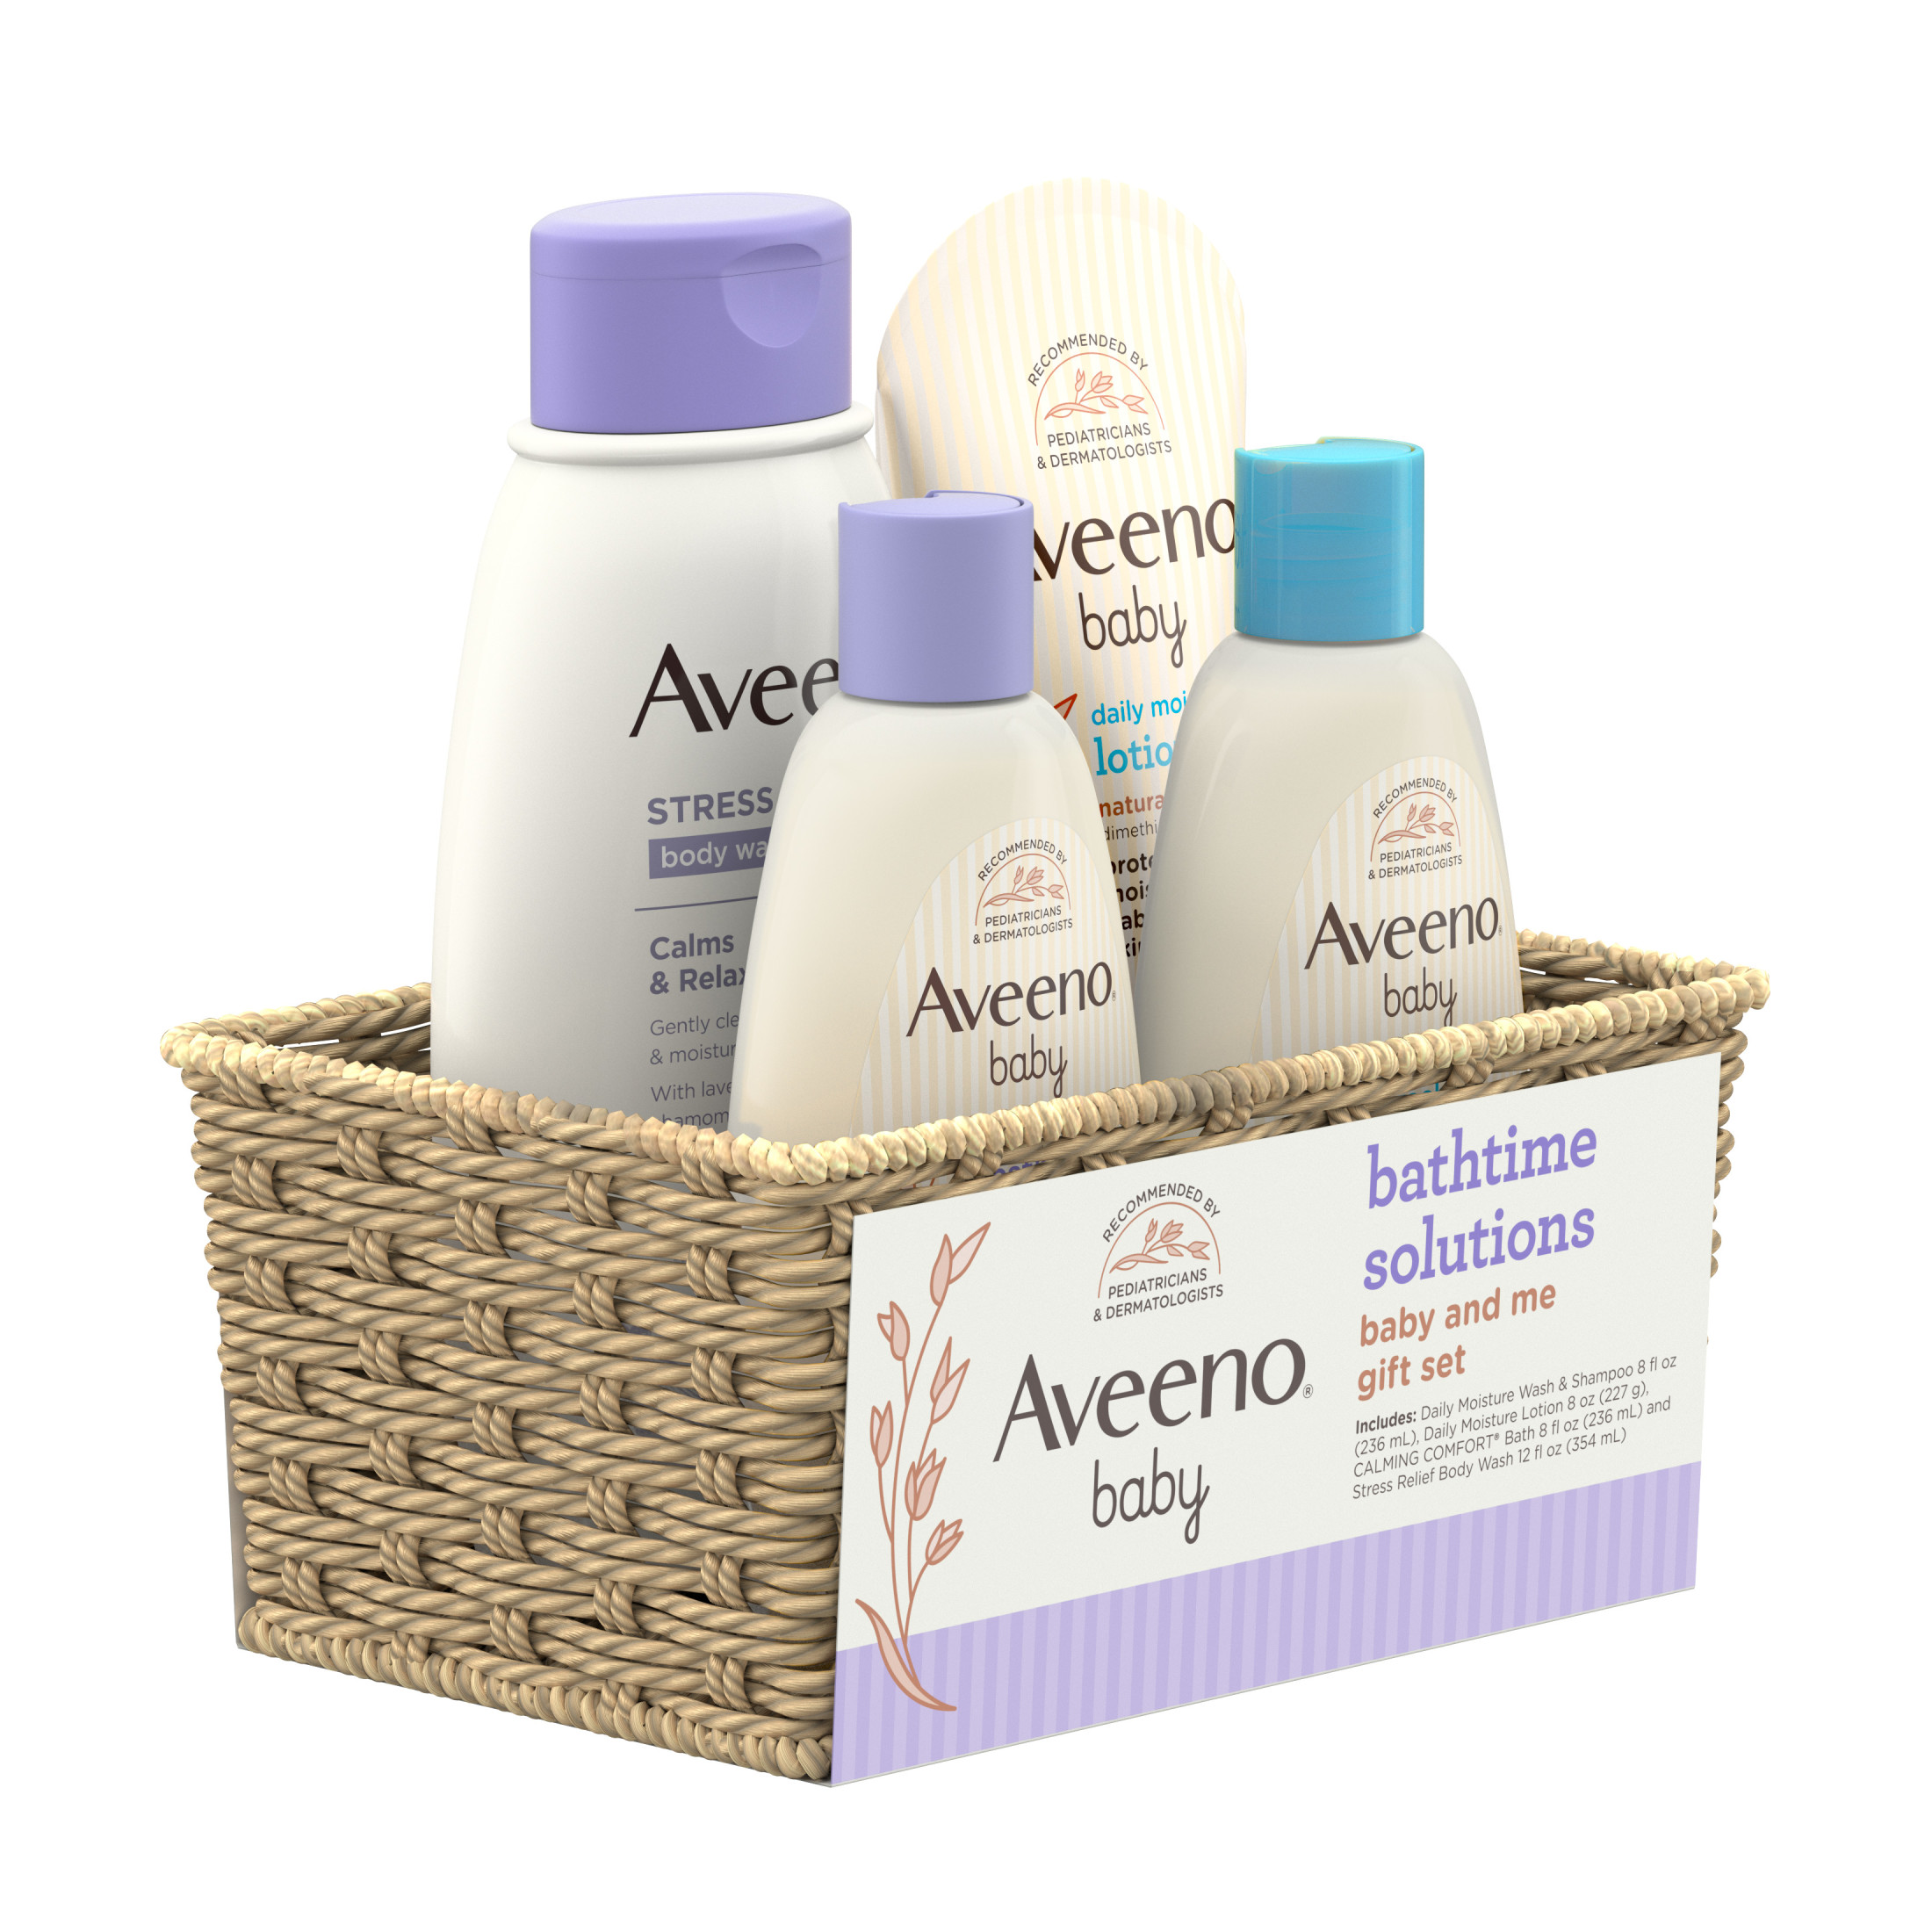 Aveeno Baby Daily Bathtime Solutions Baby & Me Gift Set, 4 items - image 4 of 9